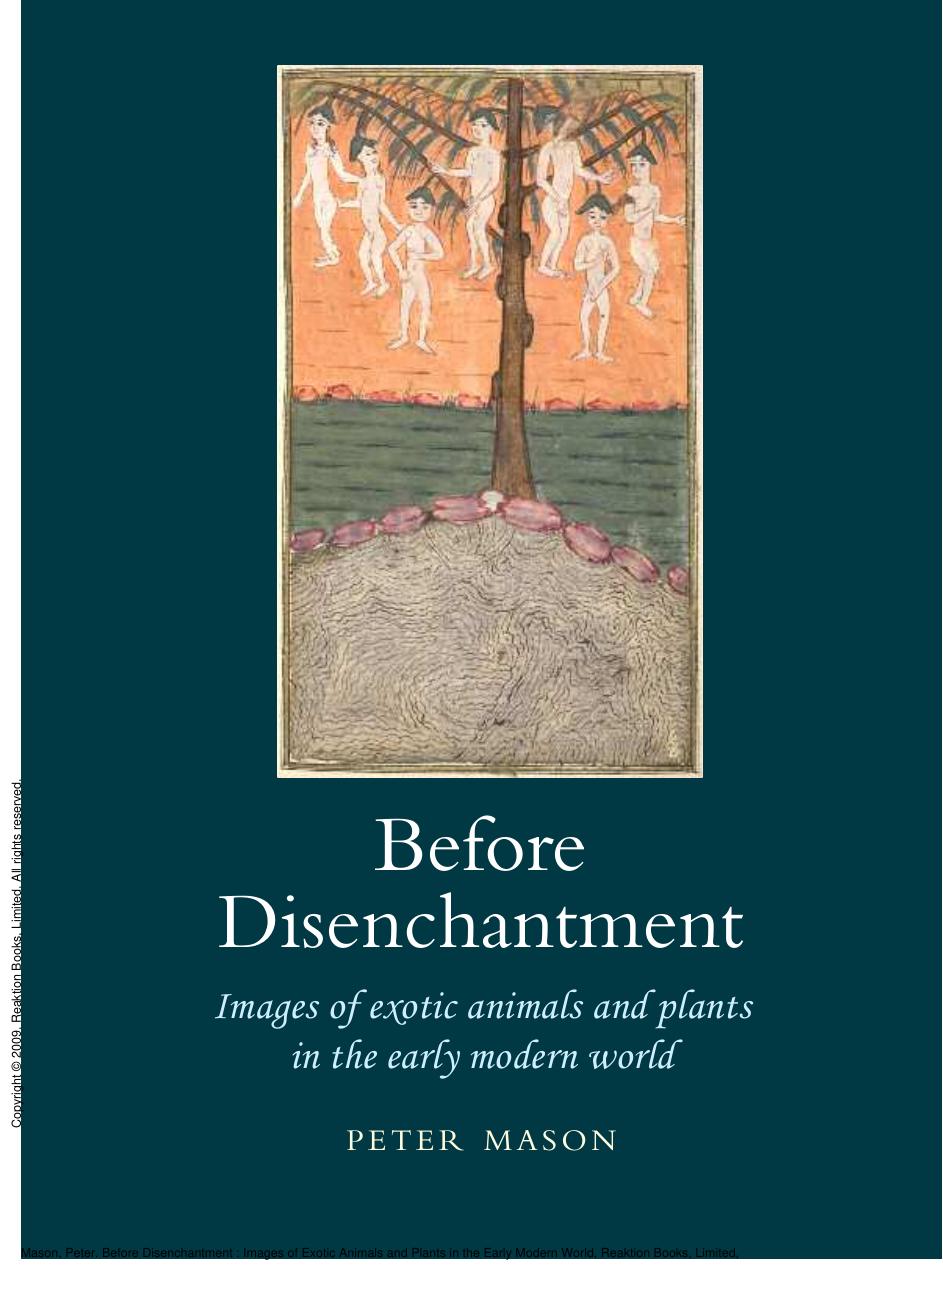 Before Disenchantment : Images of Exotic Animals and Plants in the Early Modern World by Peter Mason